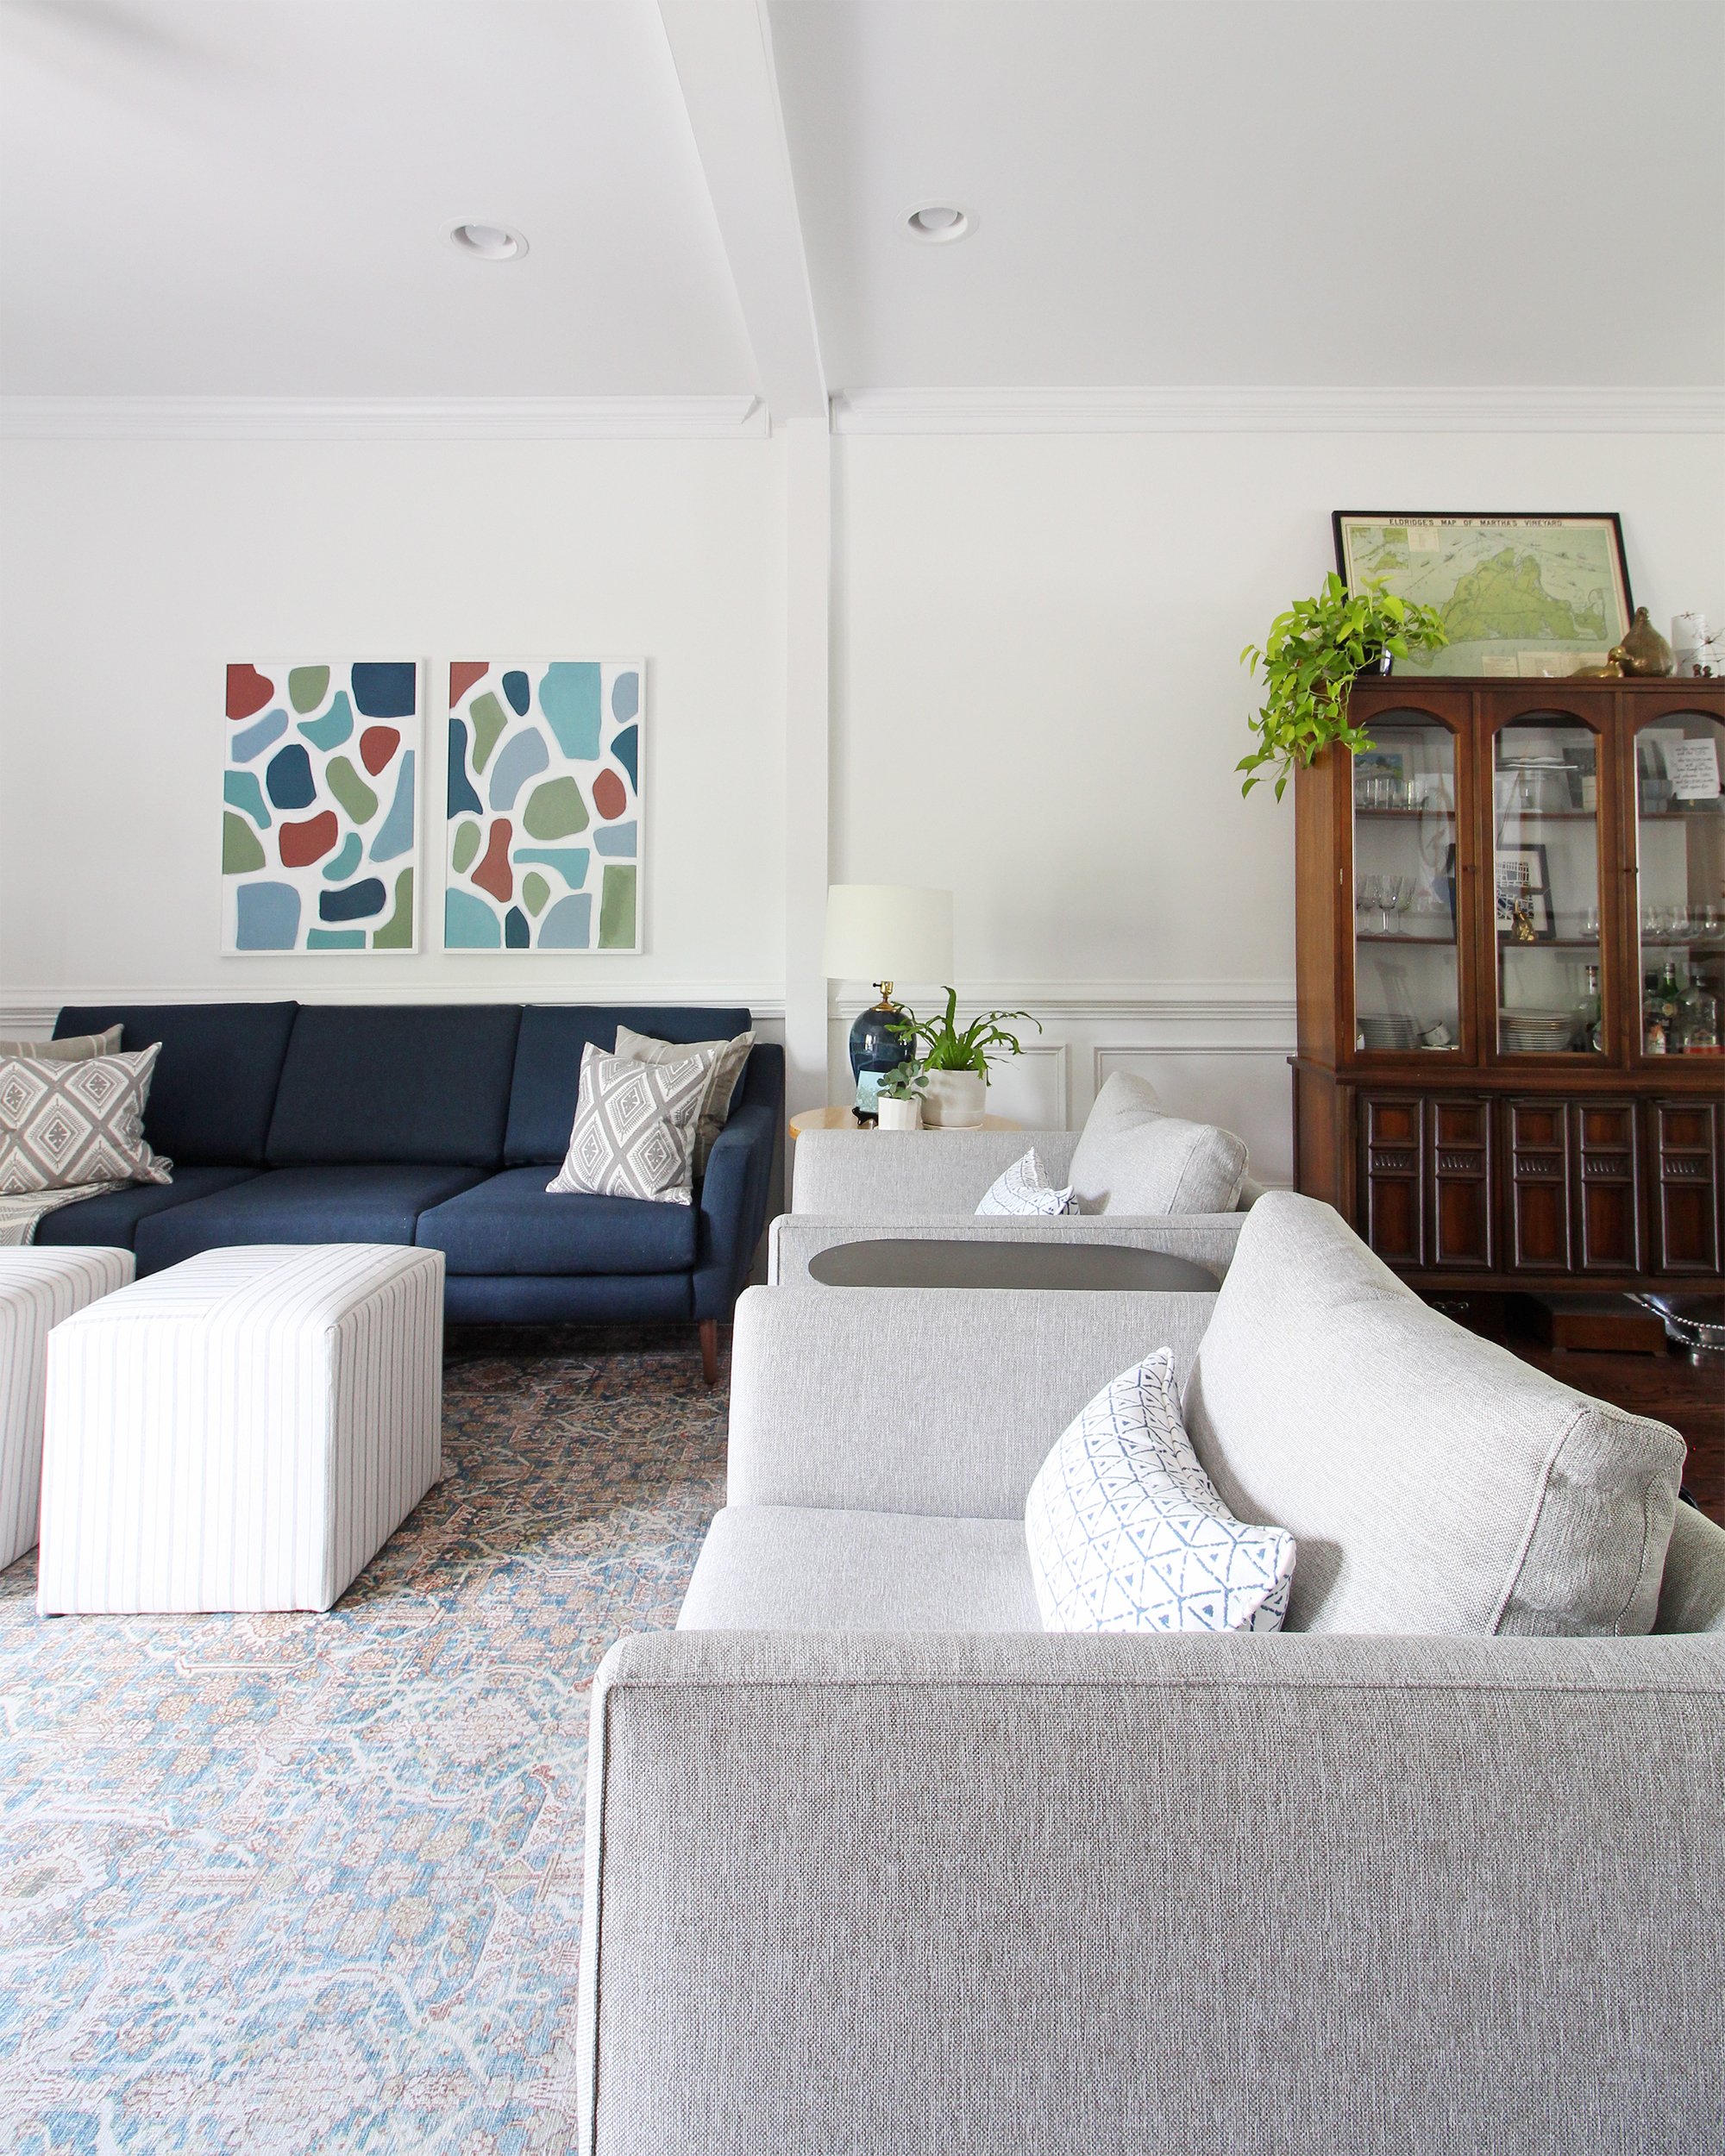 5 Tips for Creating a Cohesive Home Design